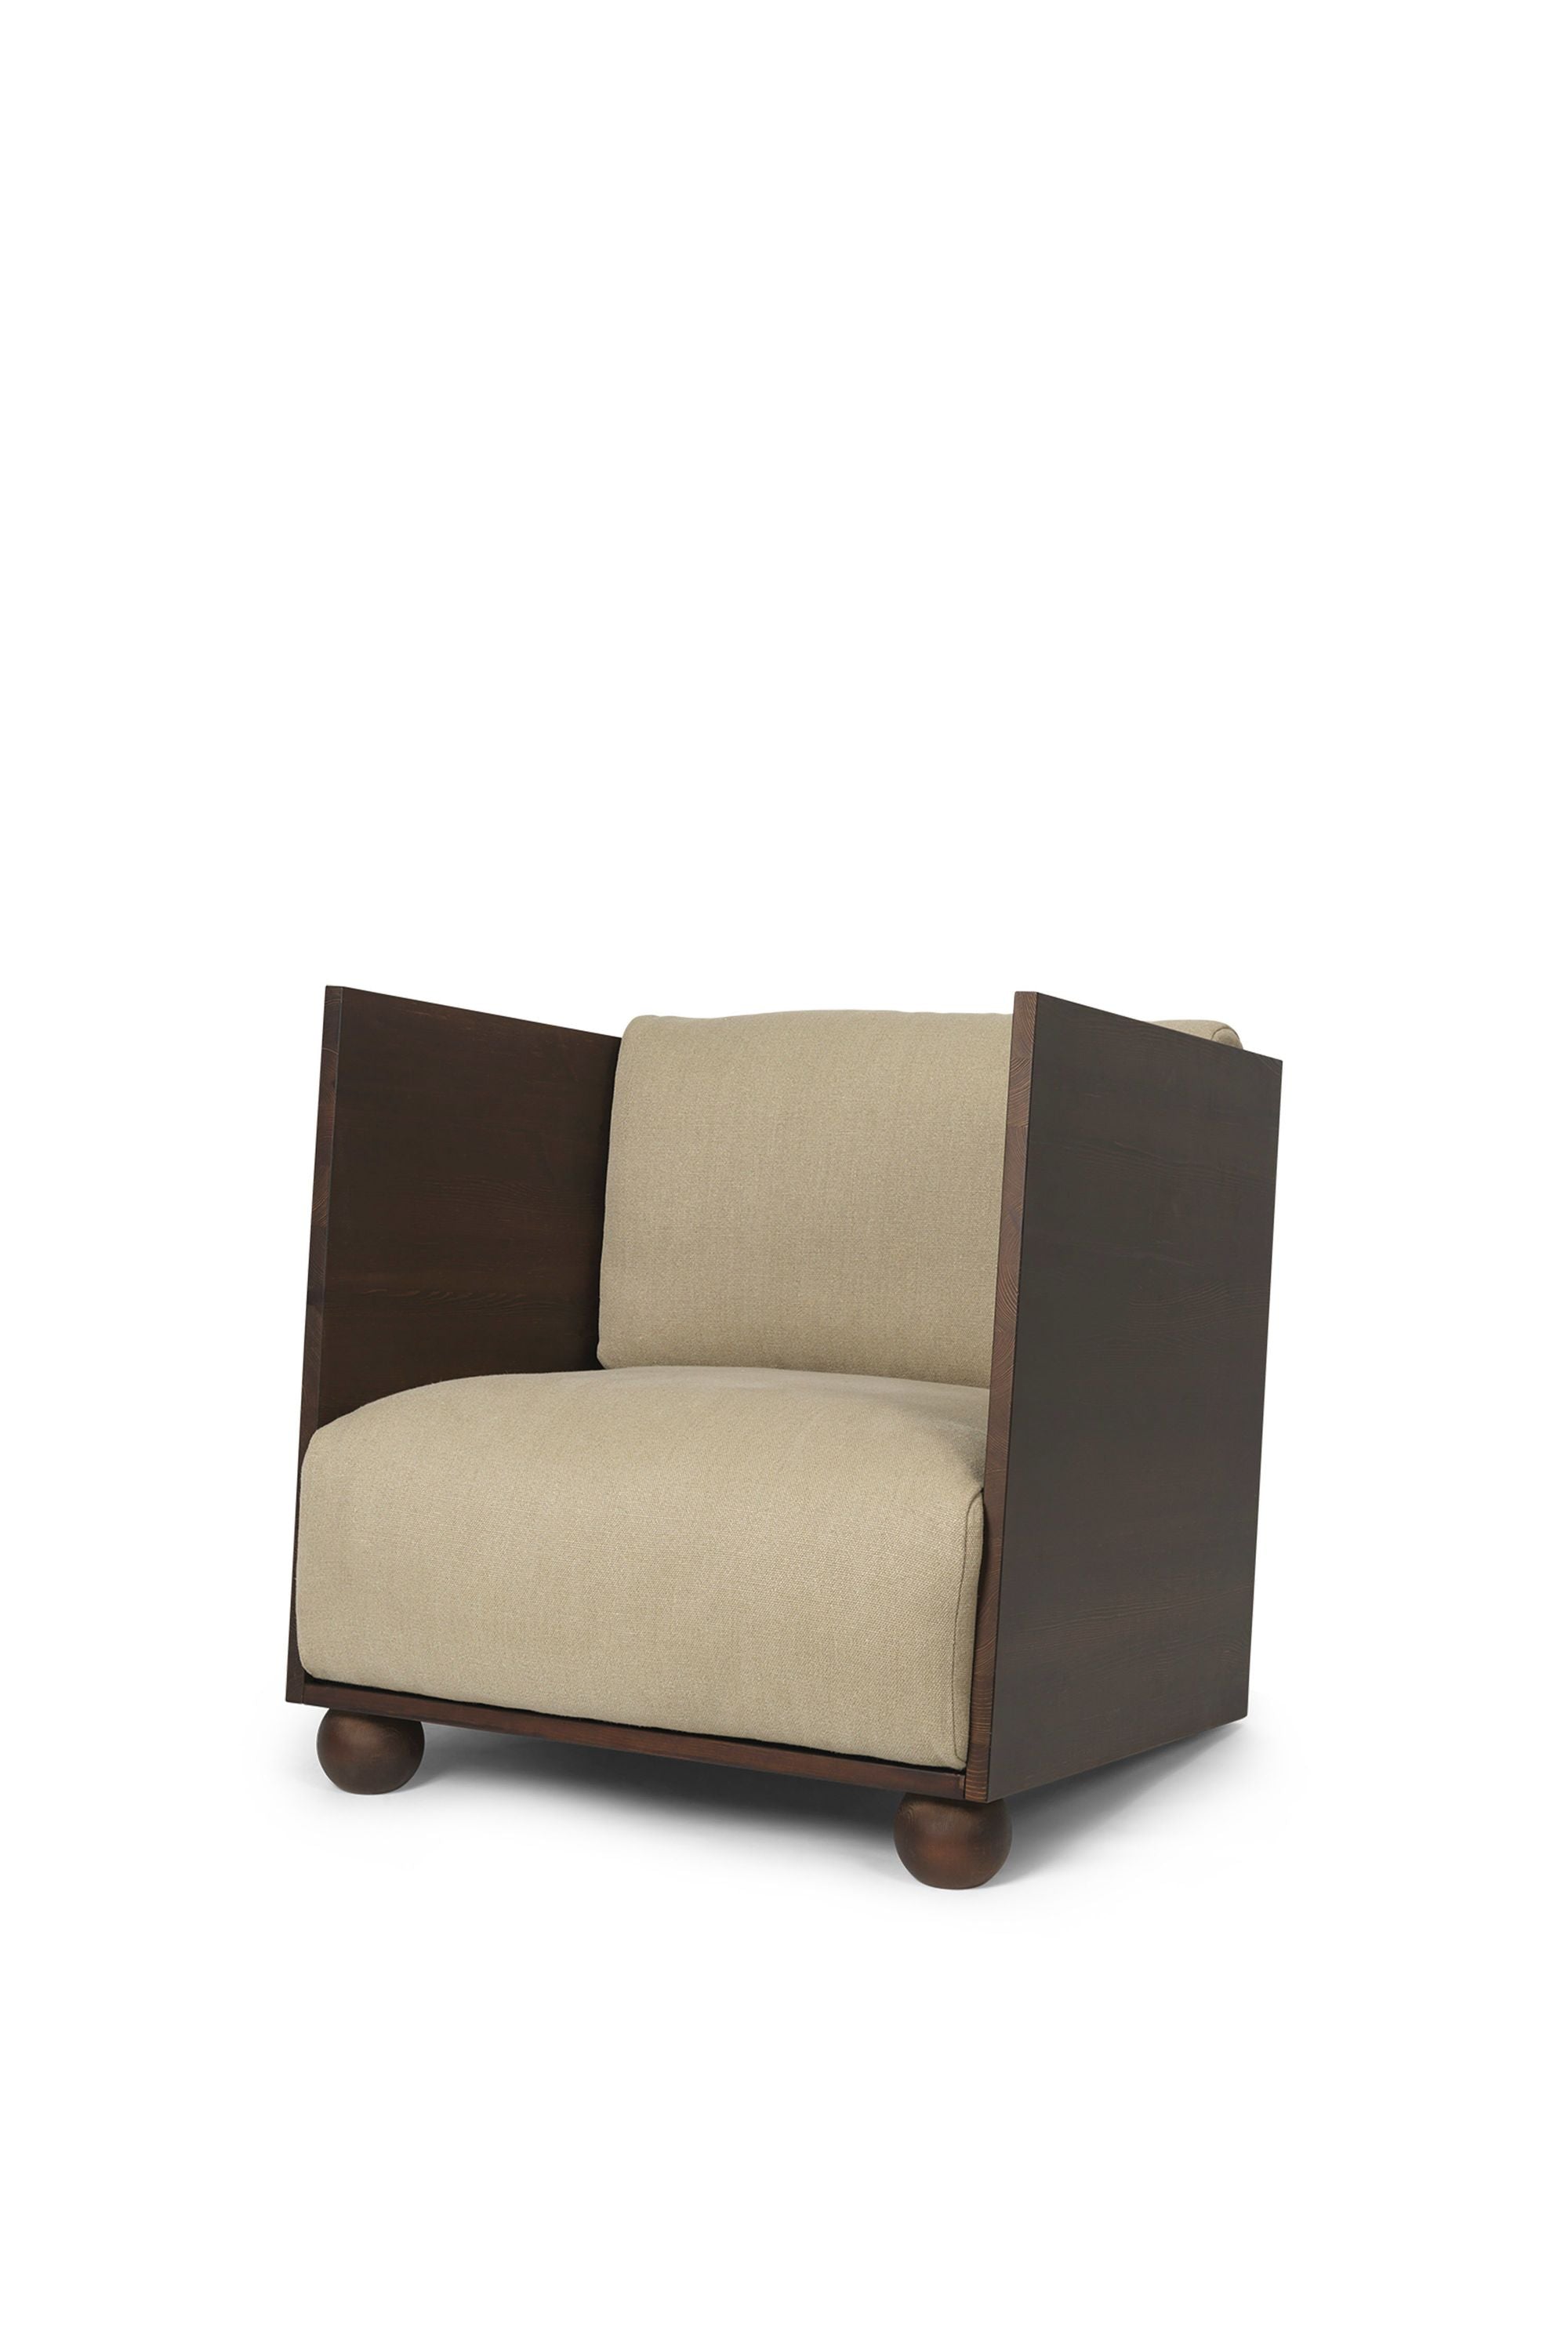 Ferm Living Rum Lounge Rich Linen, Dark Stained/Natural